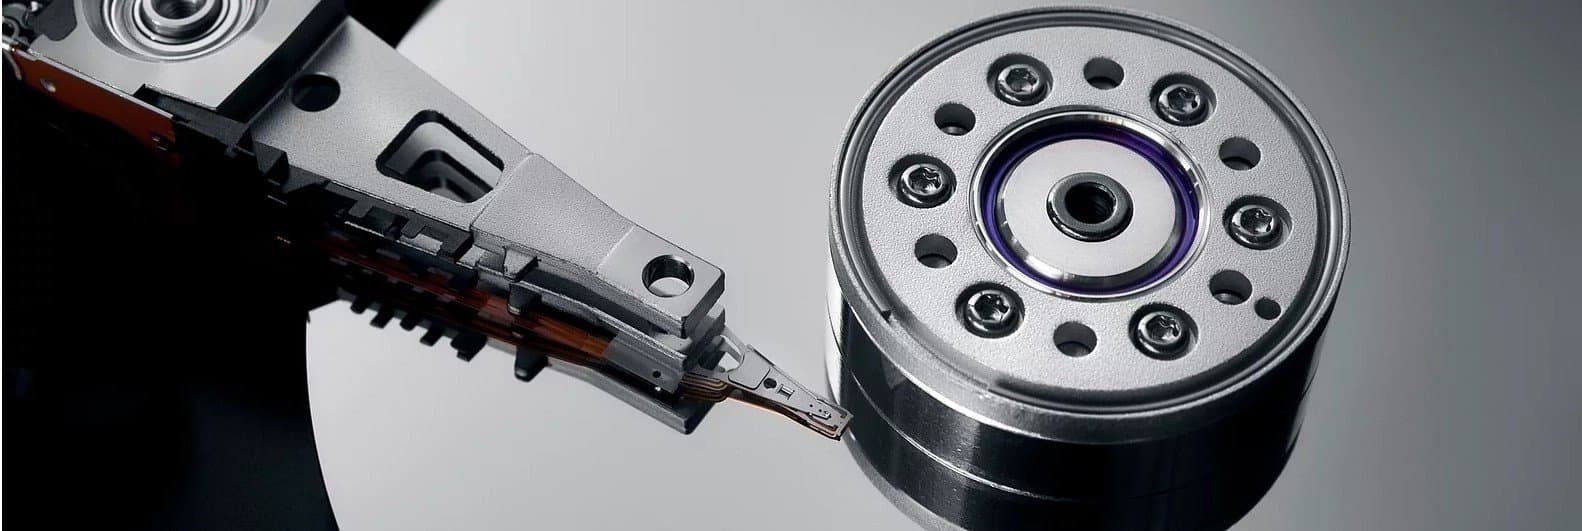 Data recovery in montreal west